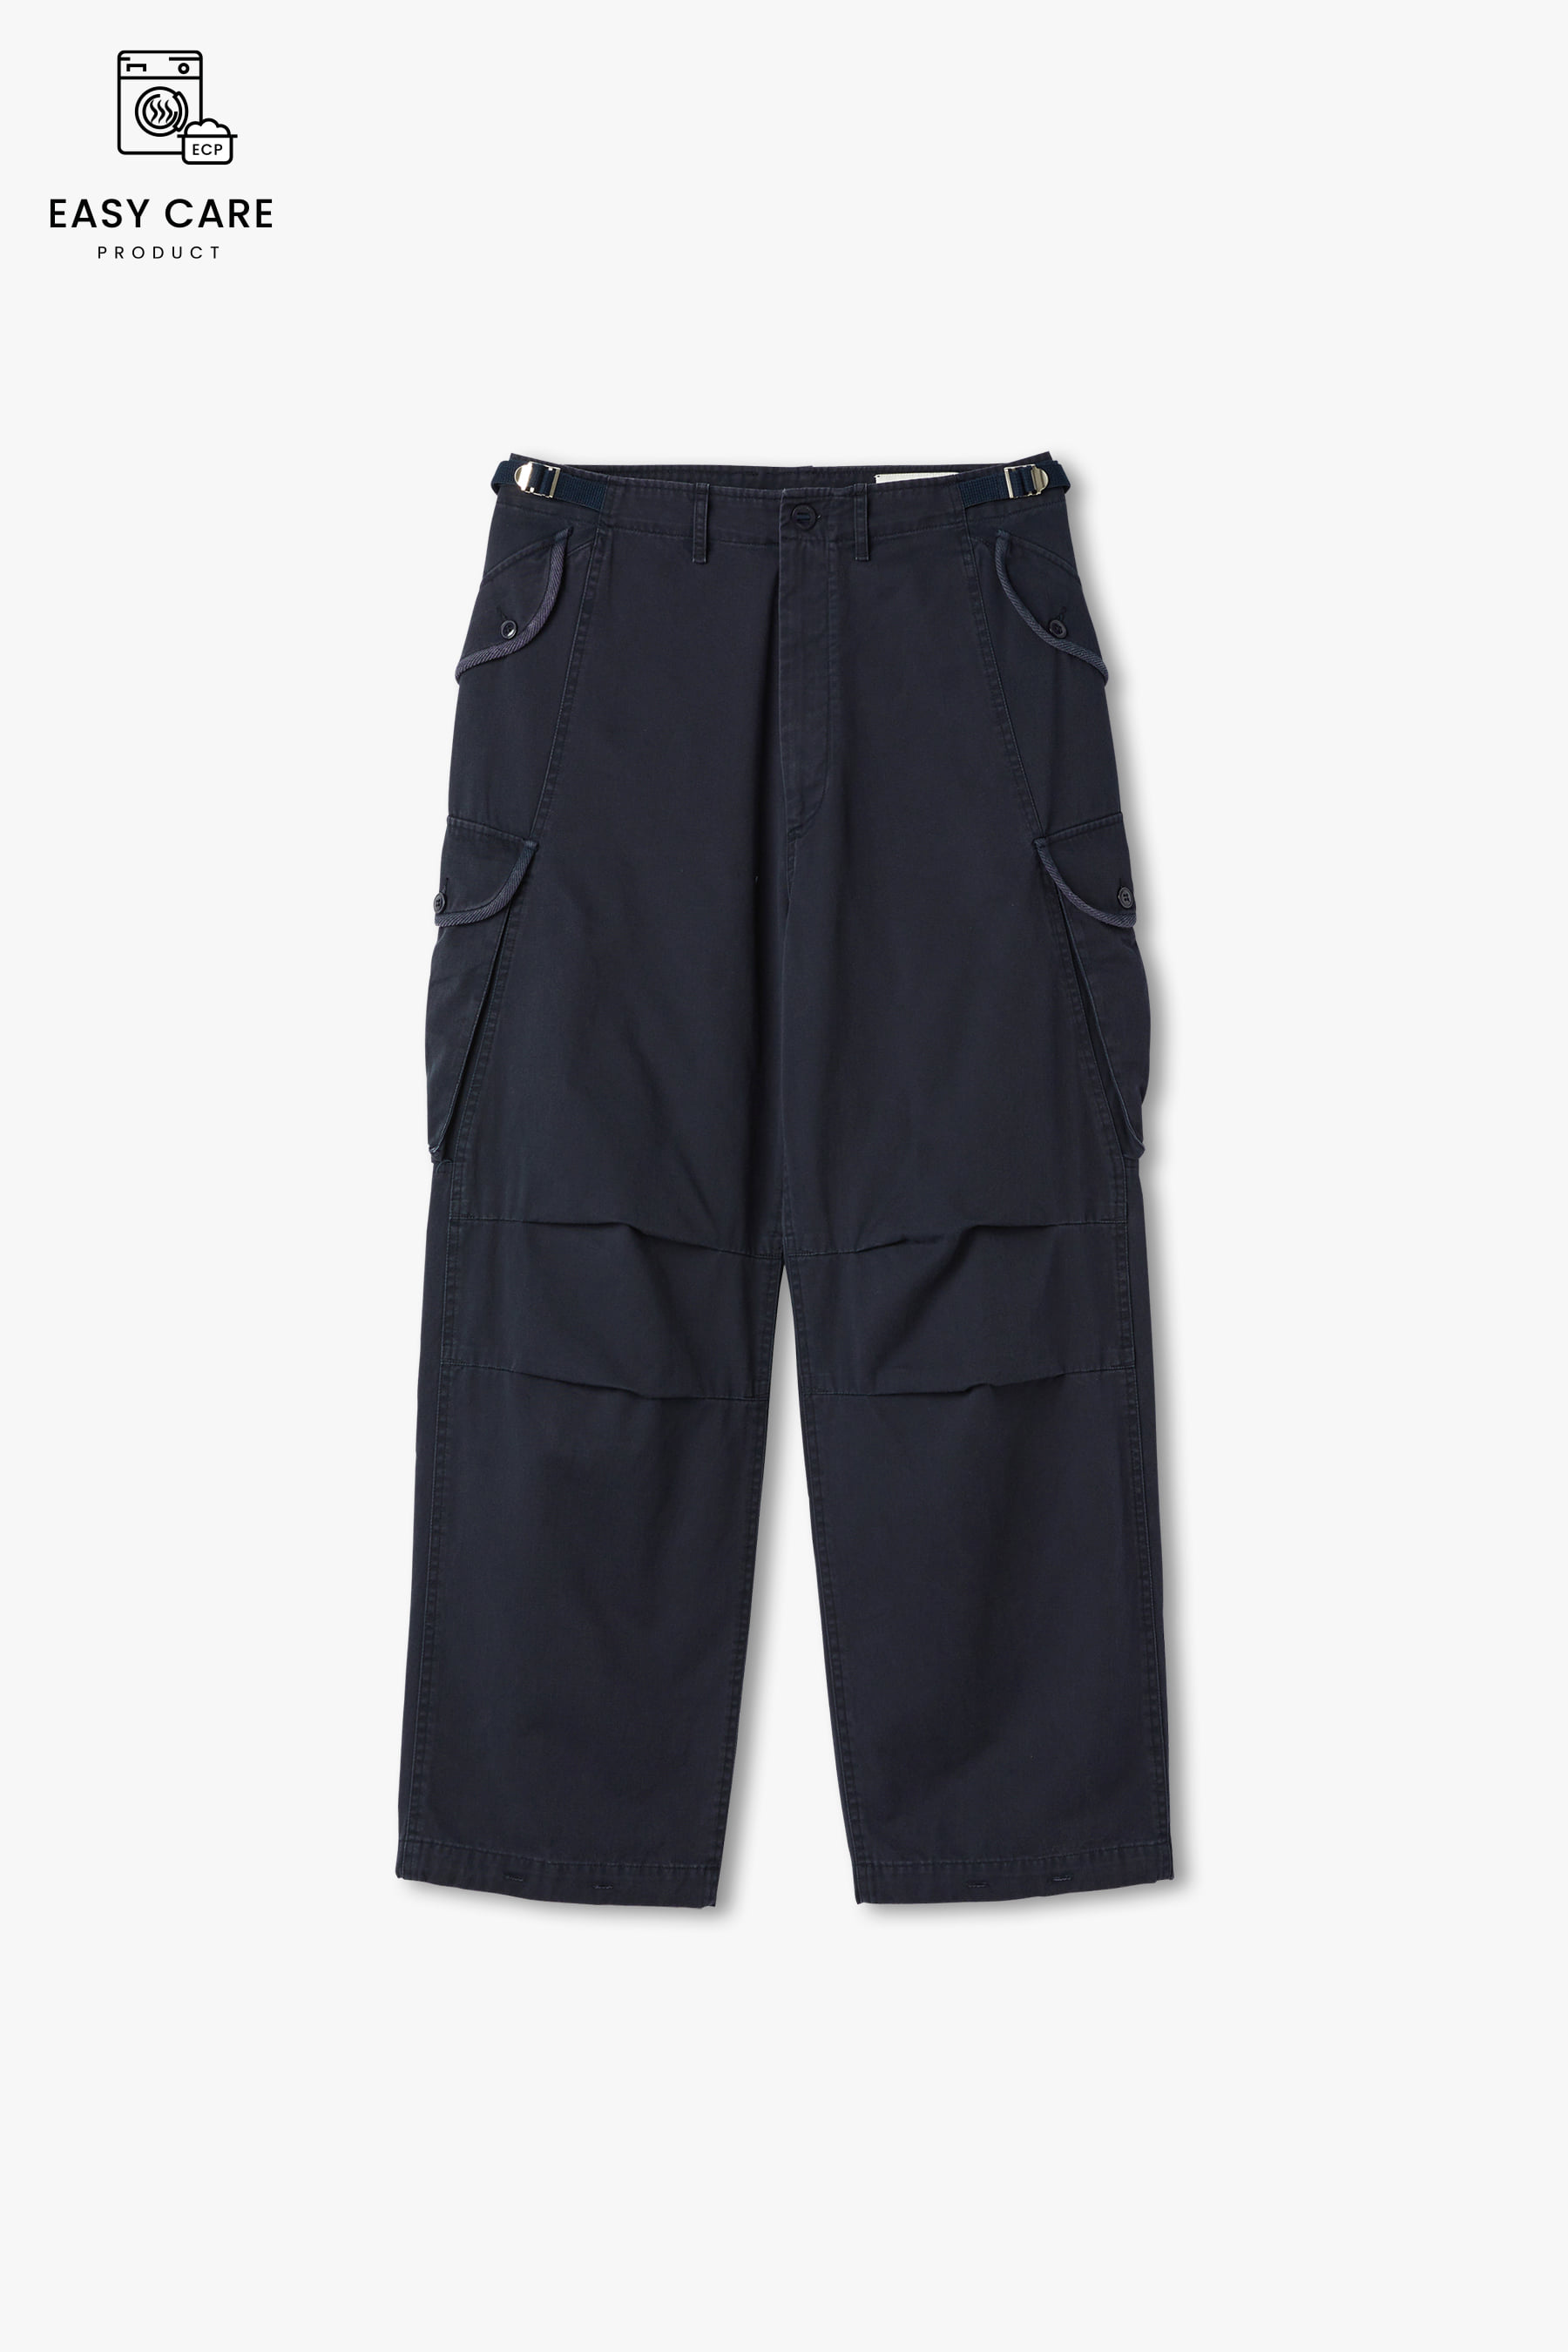 DUSTY NAVY M-74 WASHED CARGO PANTS (ECP GARMENT PROCESS)